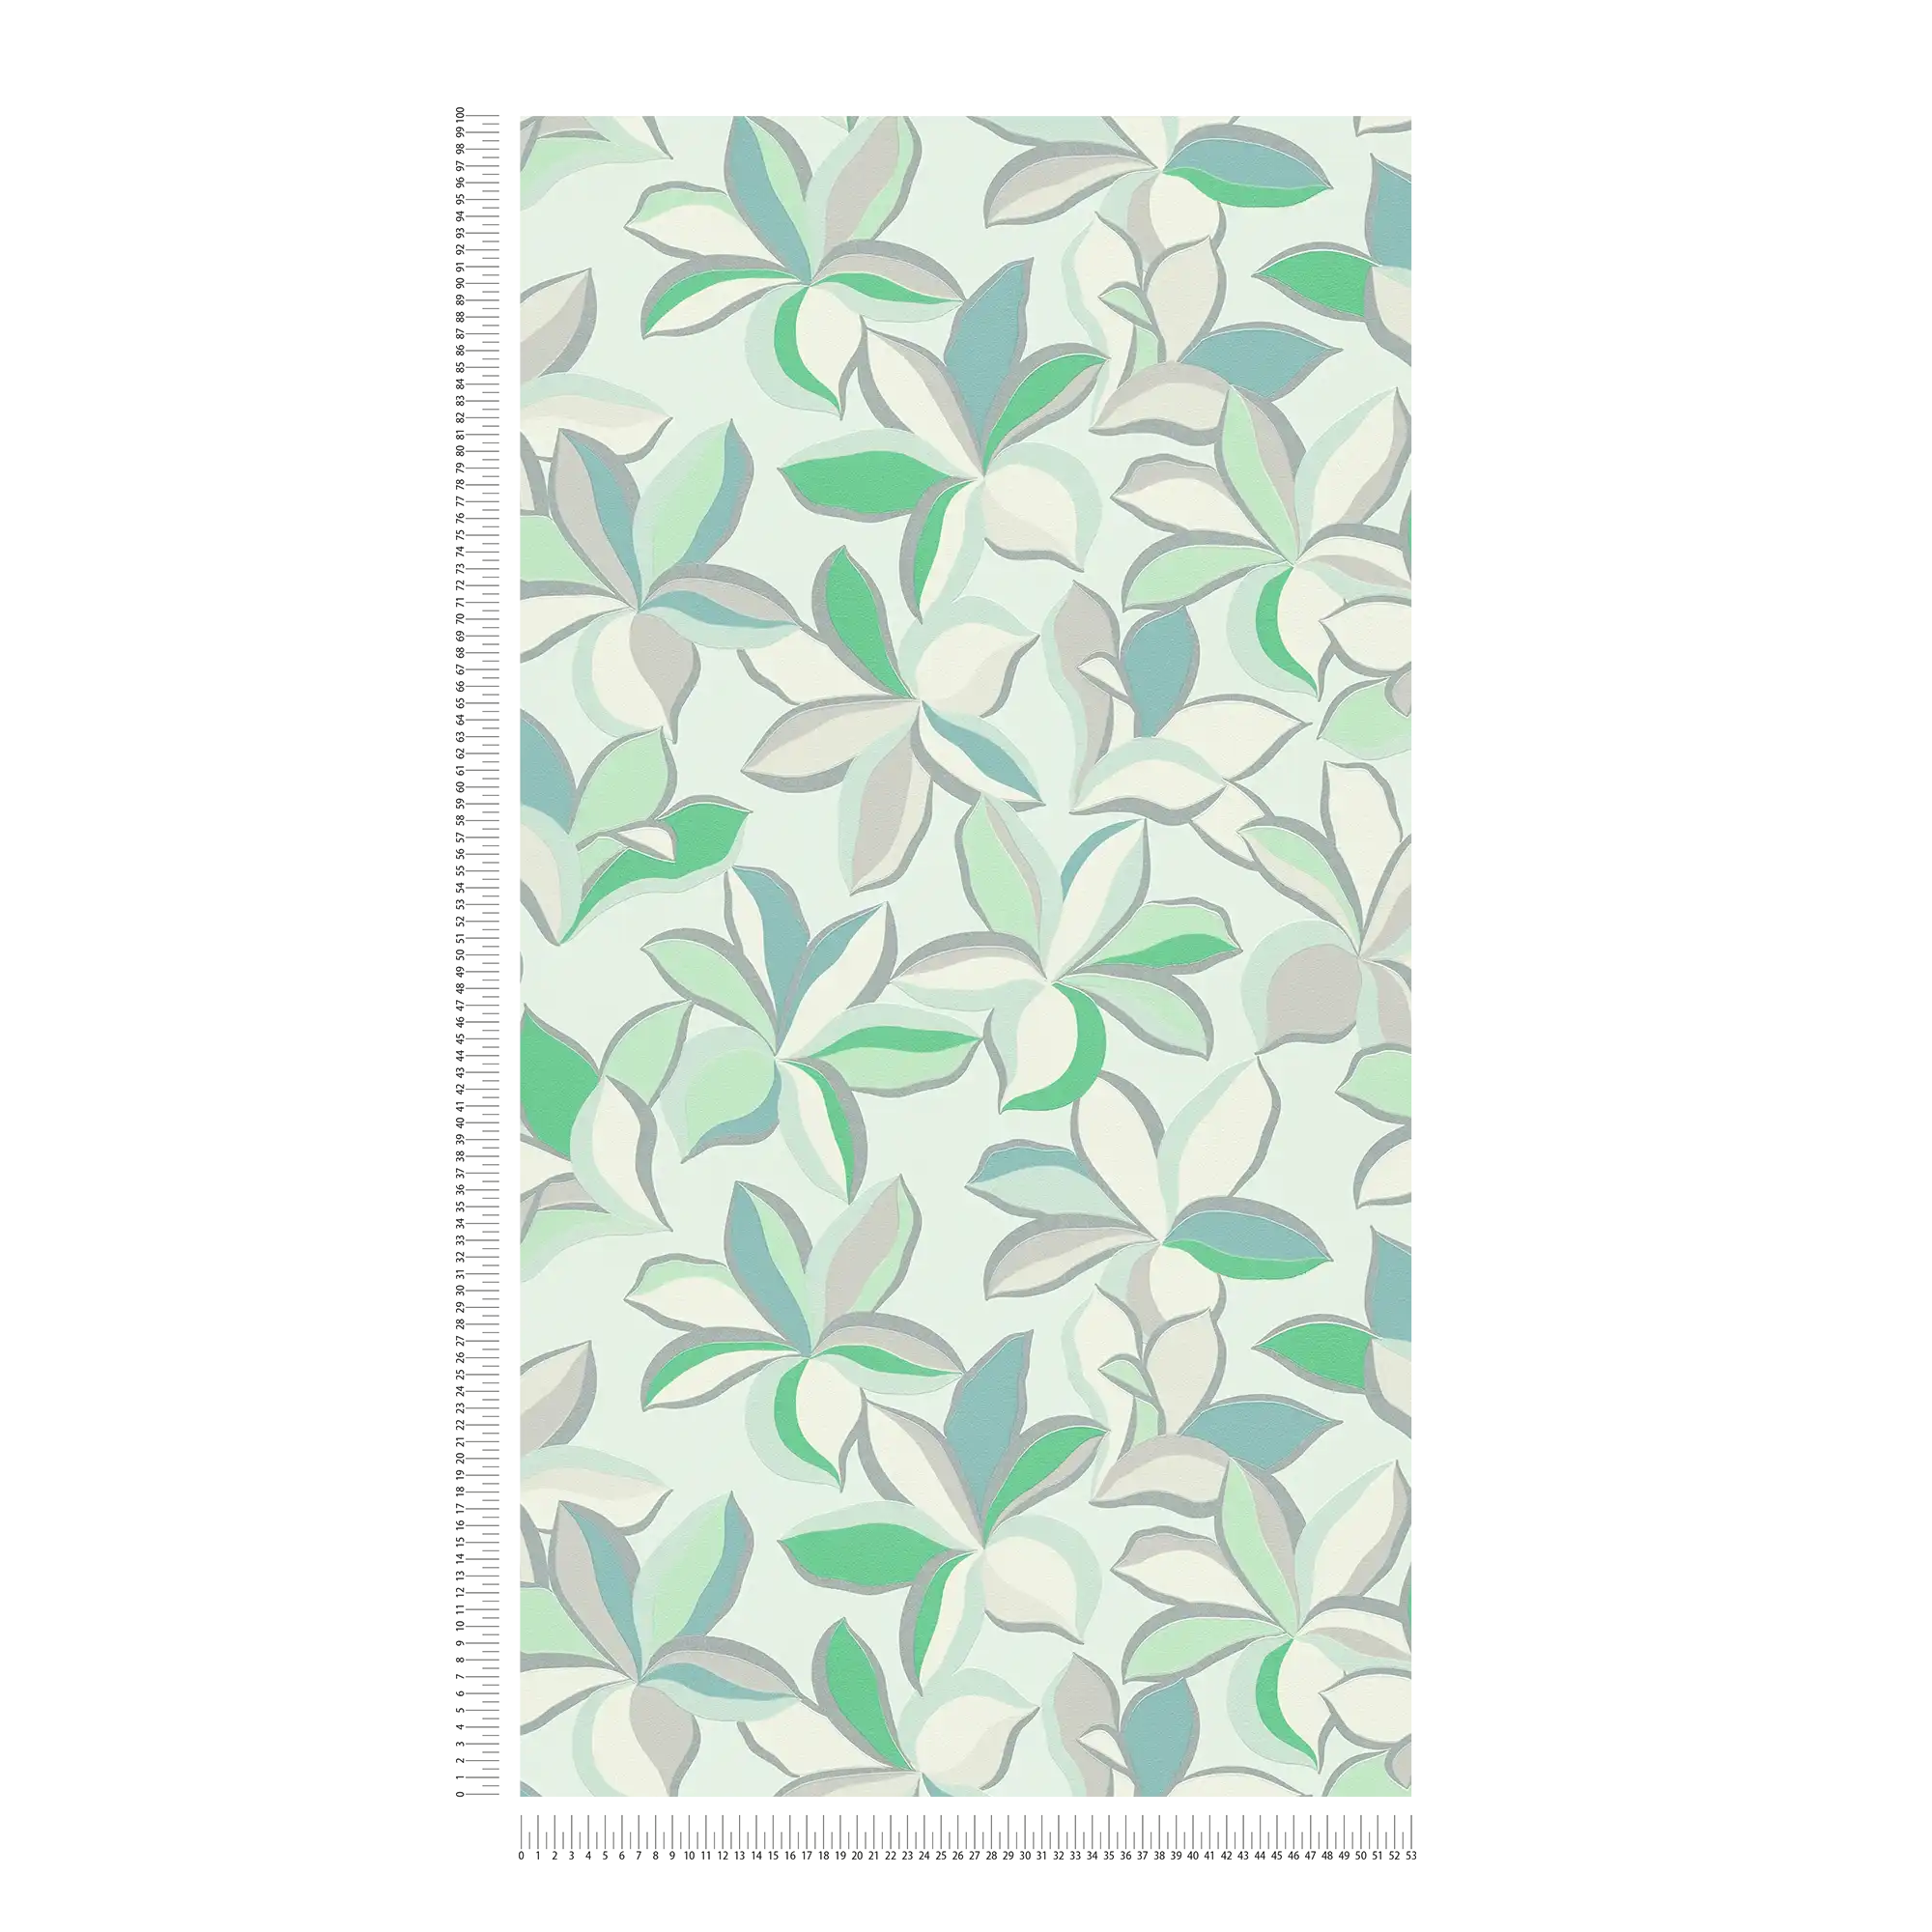             Floral non-woven wallpaper with glossy texture - green, grey
        